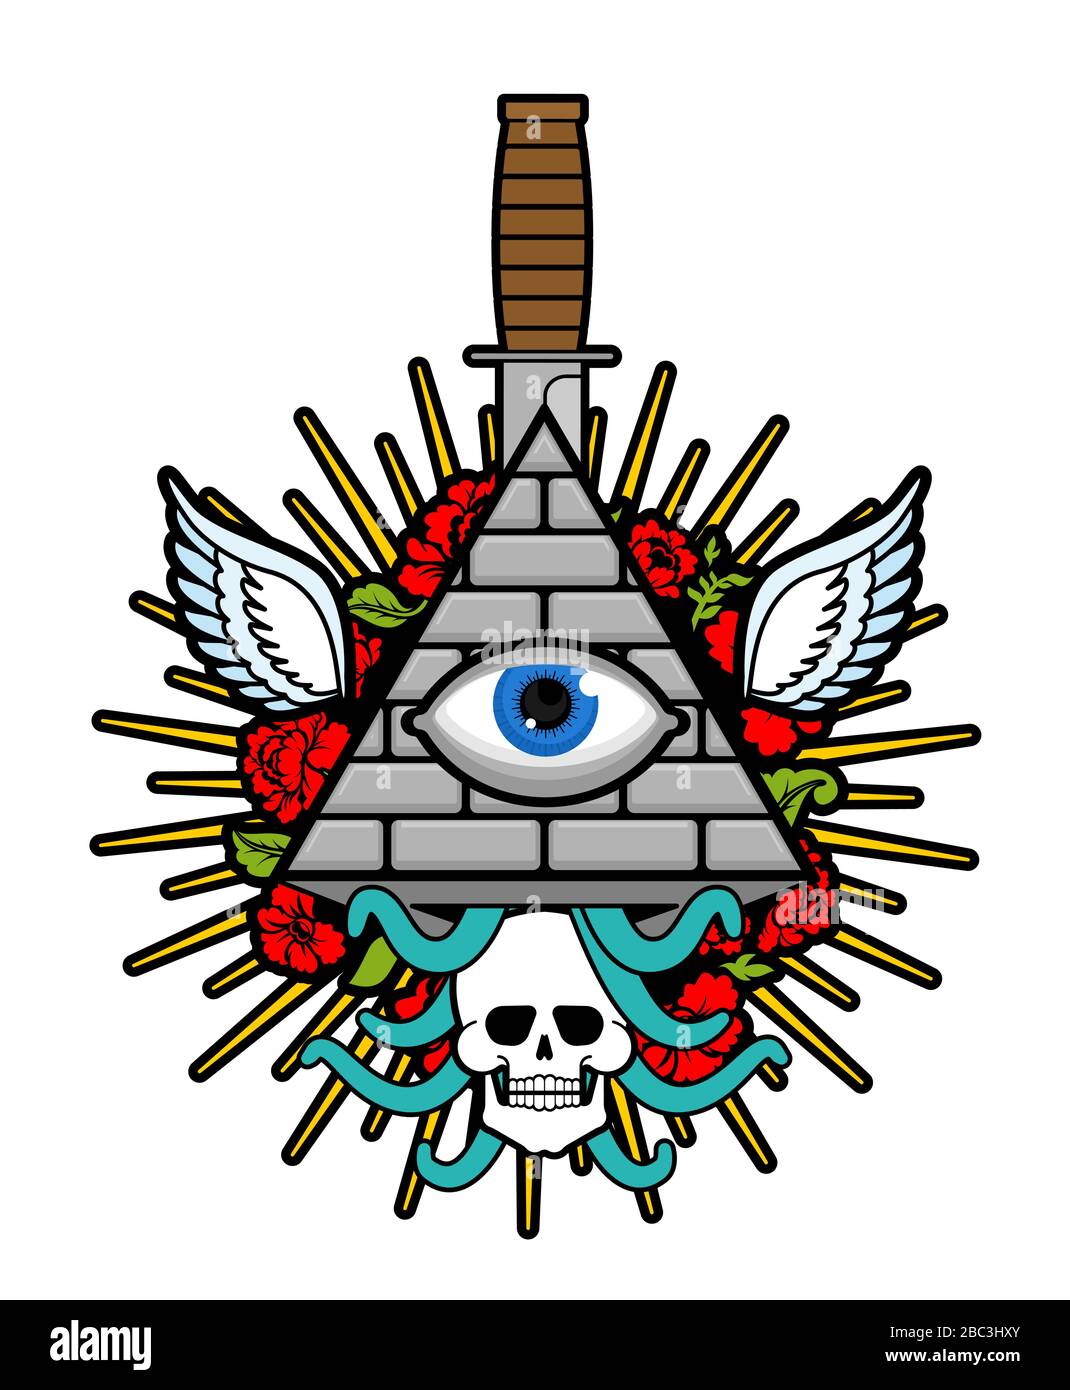 Pyramid with an eye. All-seeing eye. Symbol of world government. Illuminati conspiracy theory. sacred sign Stock Vector